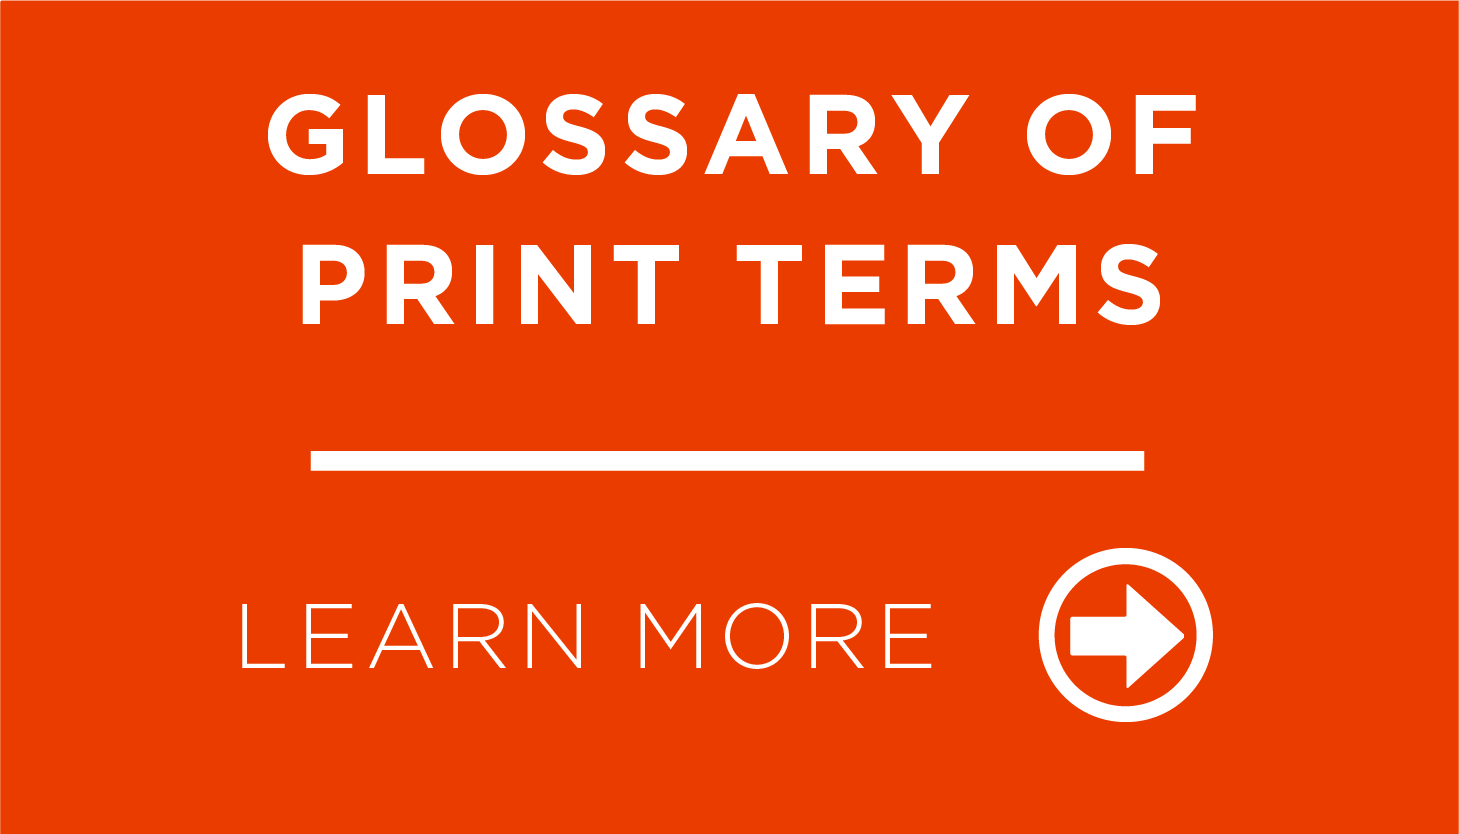 Glossary of Print Terms